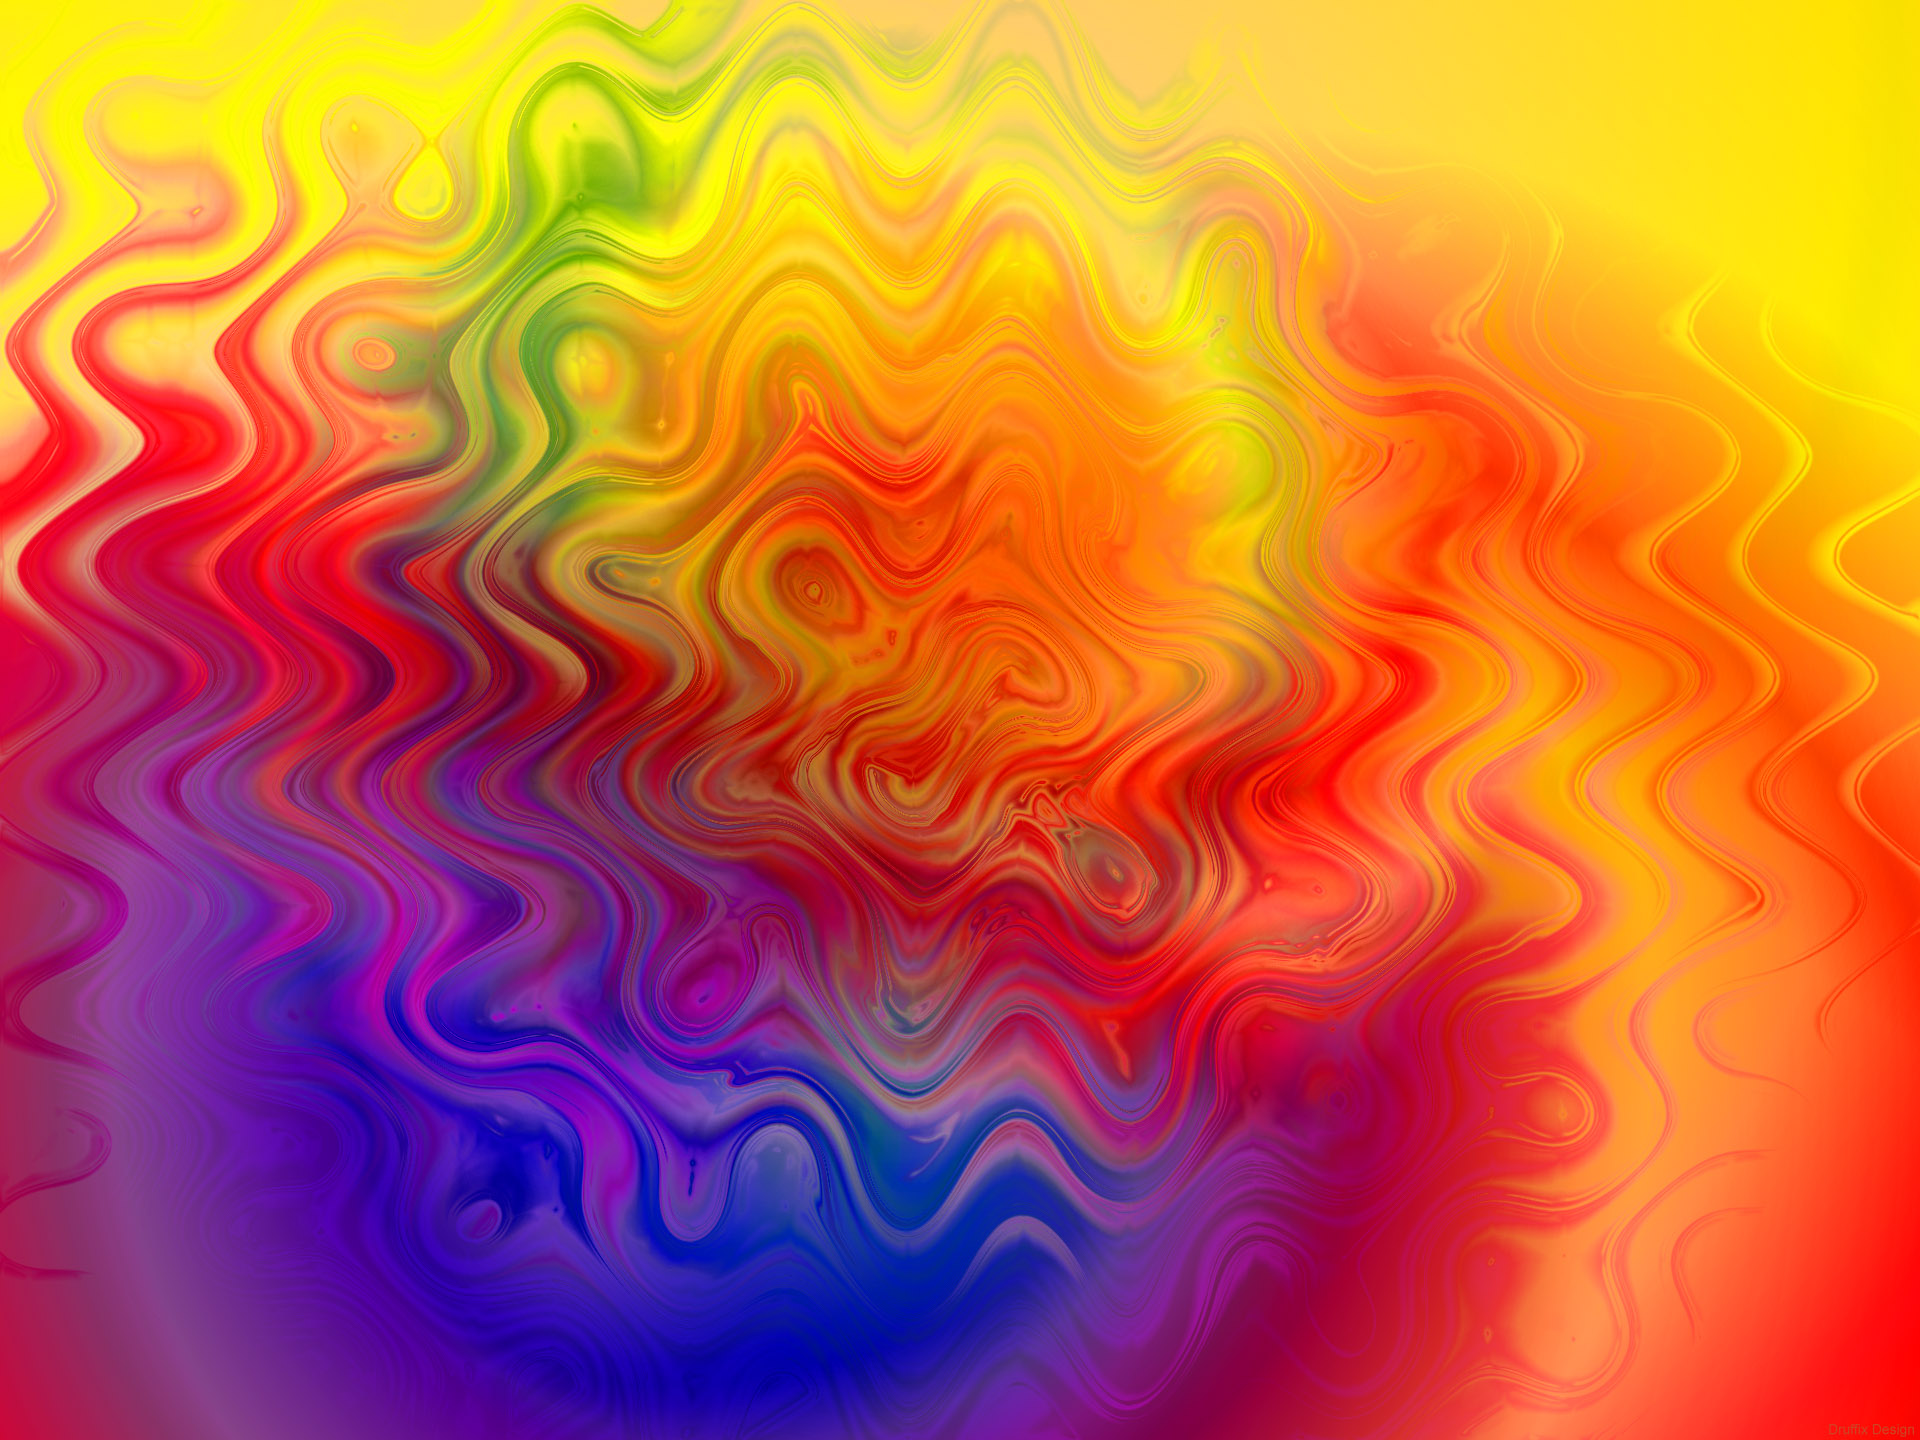 New Trippy Psychedelic Hd image